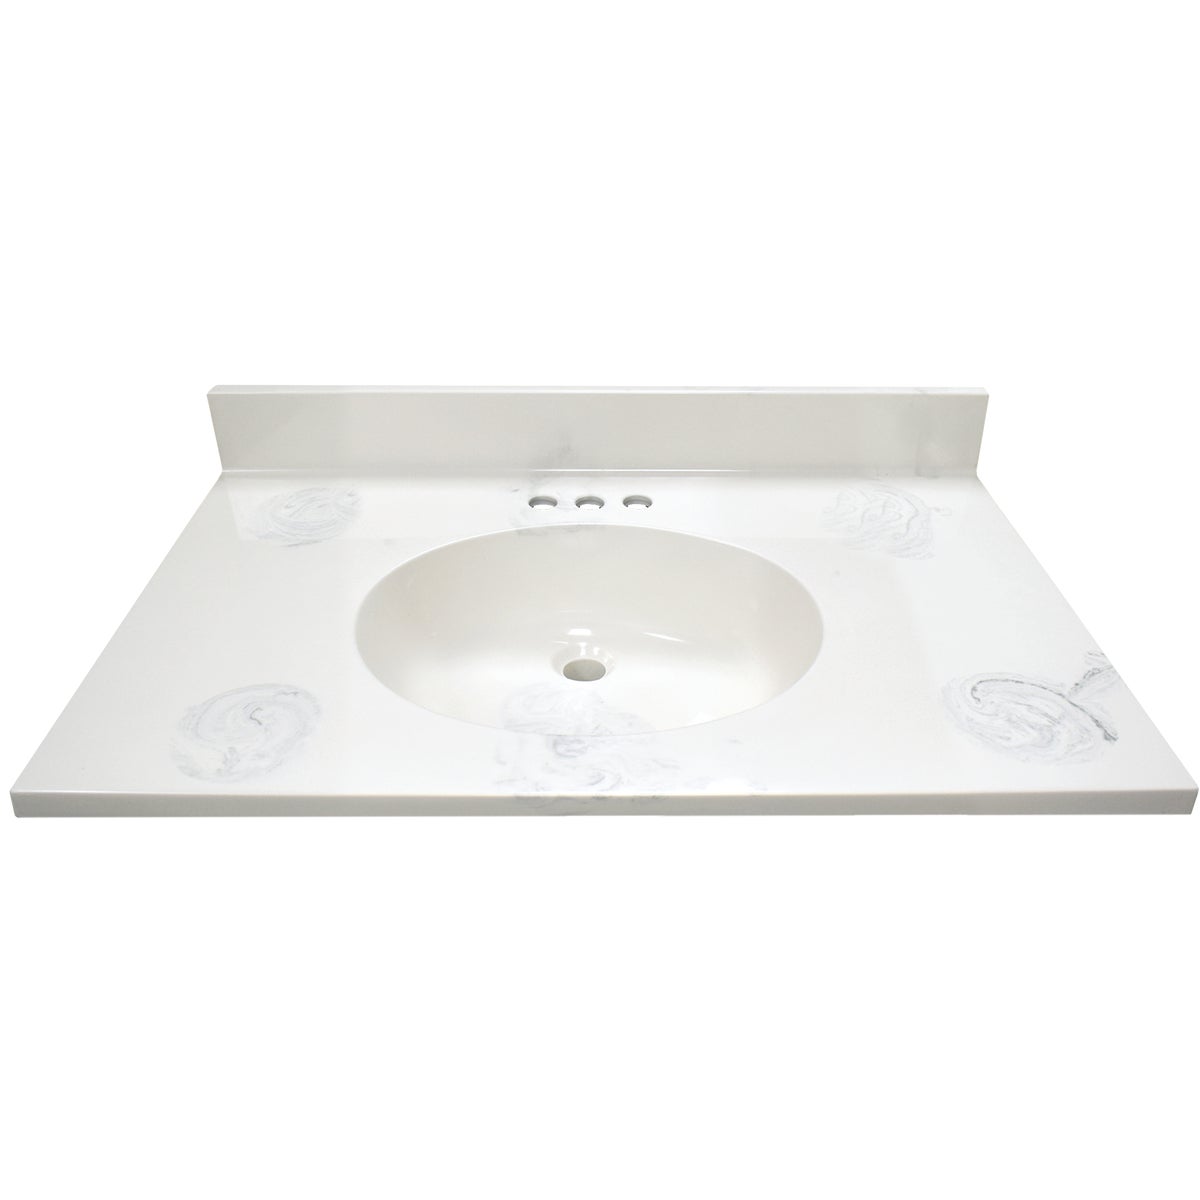 Modular Vanity Tops 31 In. W x 22 In. D Marbled Dove Gray Cultured Marble Flat Edge Single Sink Vanity Top with Oval Bowl